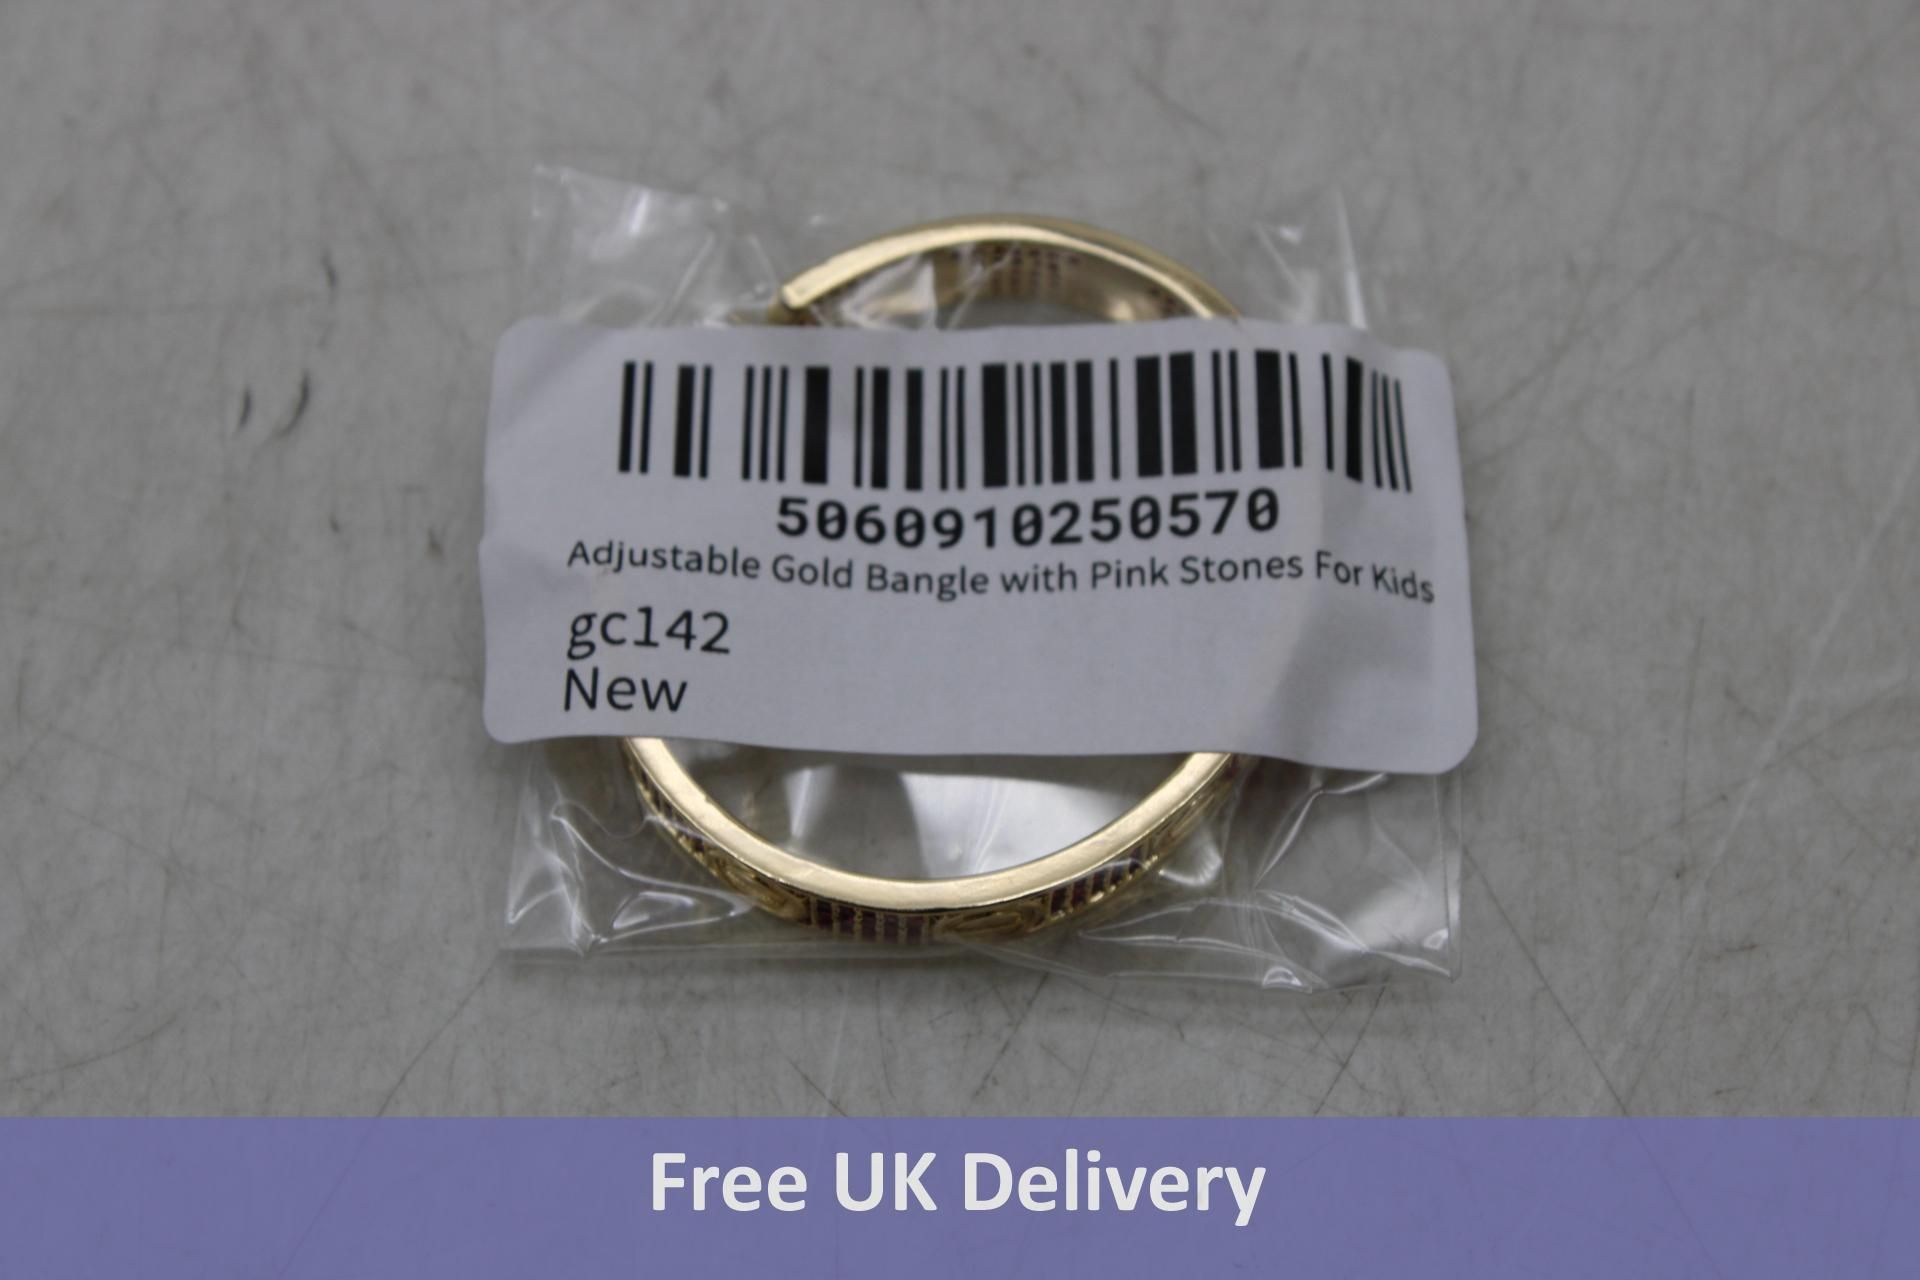 Four Adjustable Kids Bangles with Pink Stones, Gold Colour, GC142